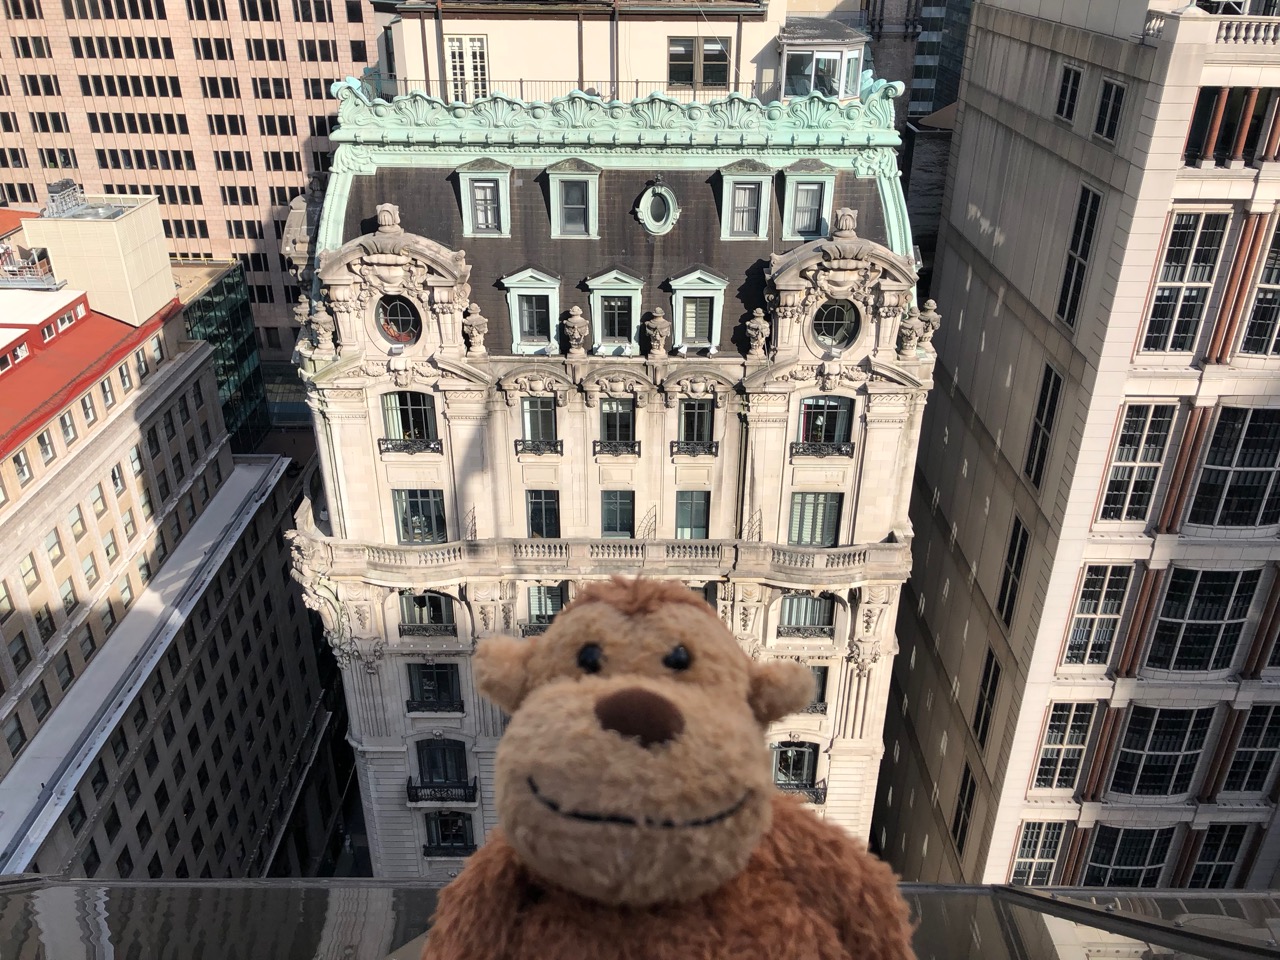 a stuffed monkey on a ledge overlooking a large building